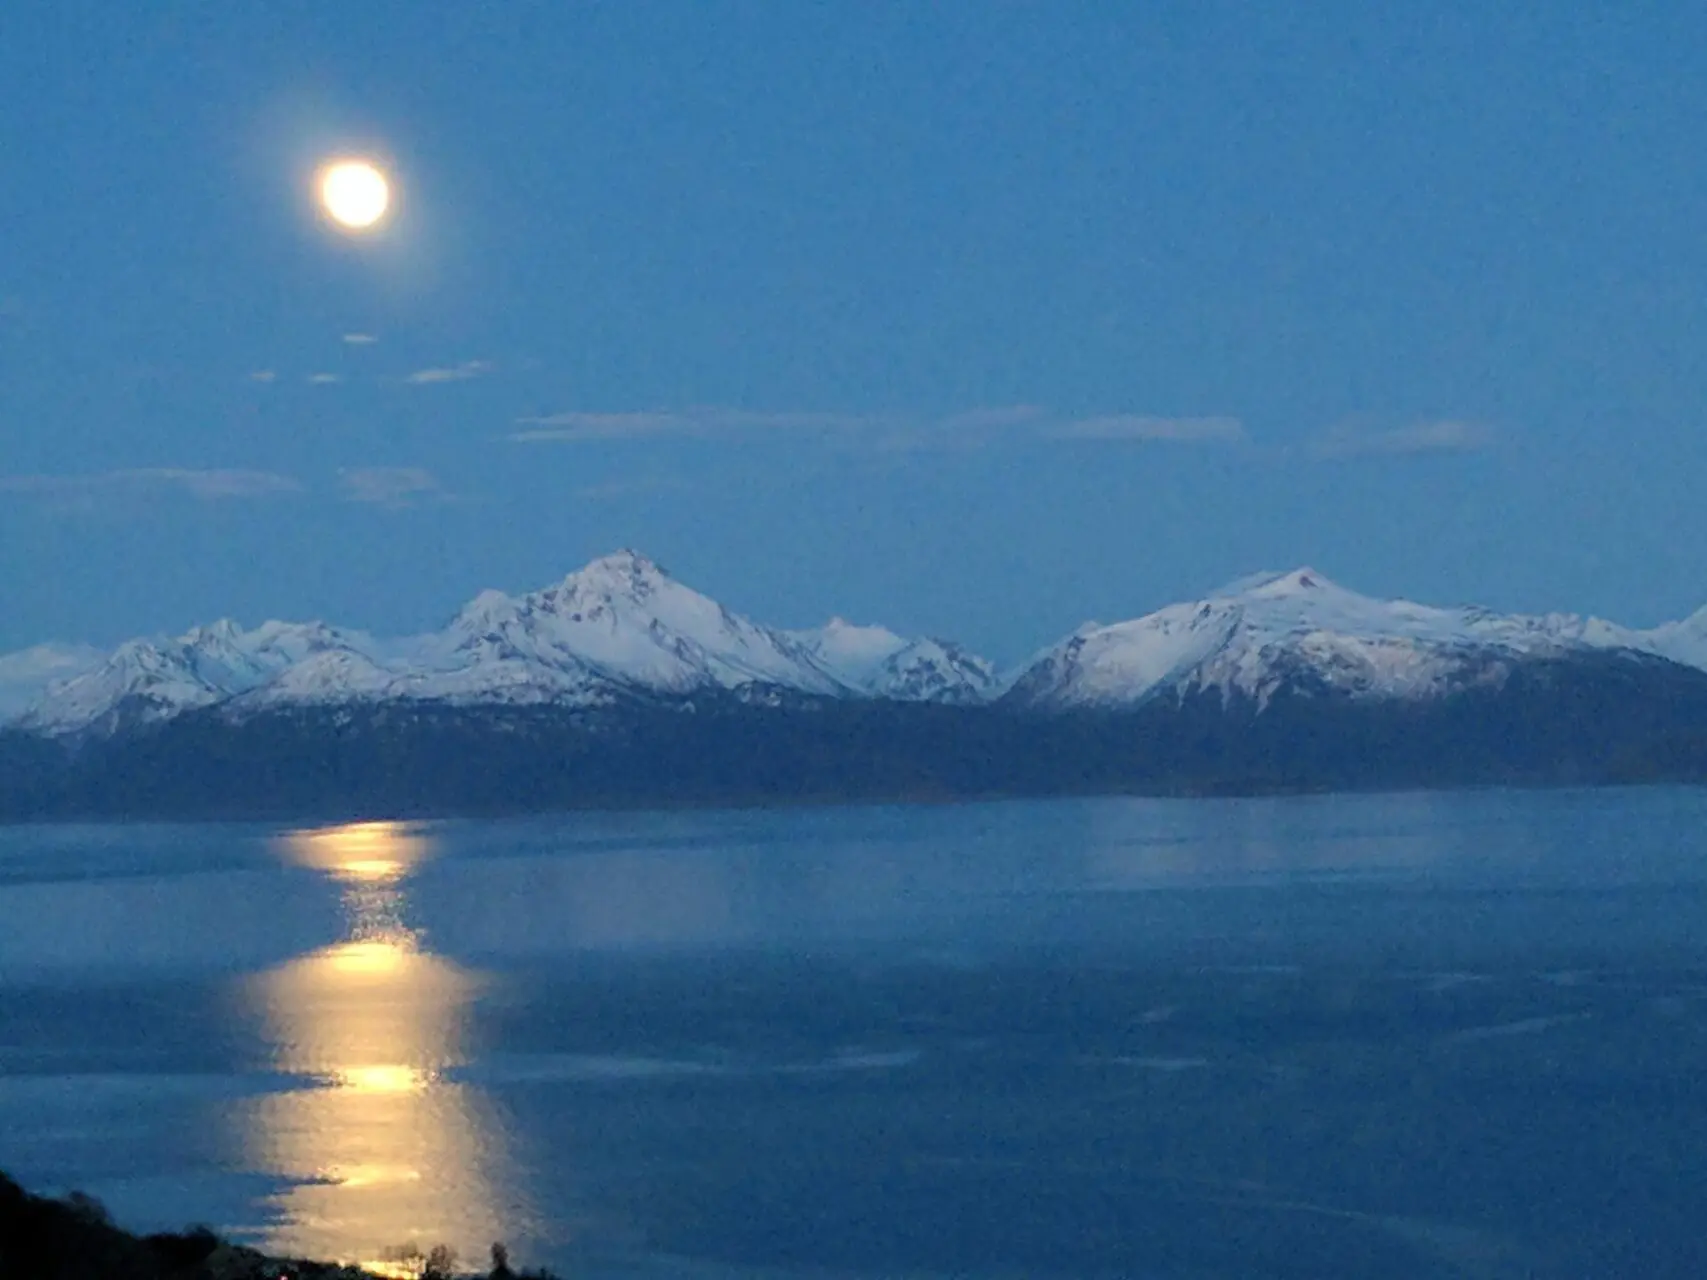 A full moon over the mountains and water.